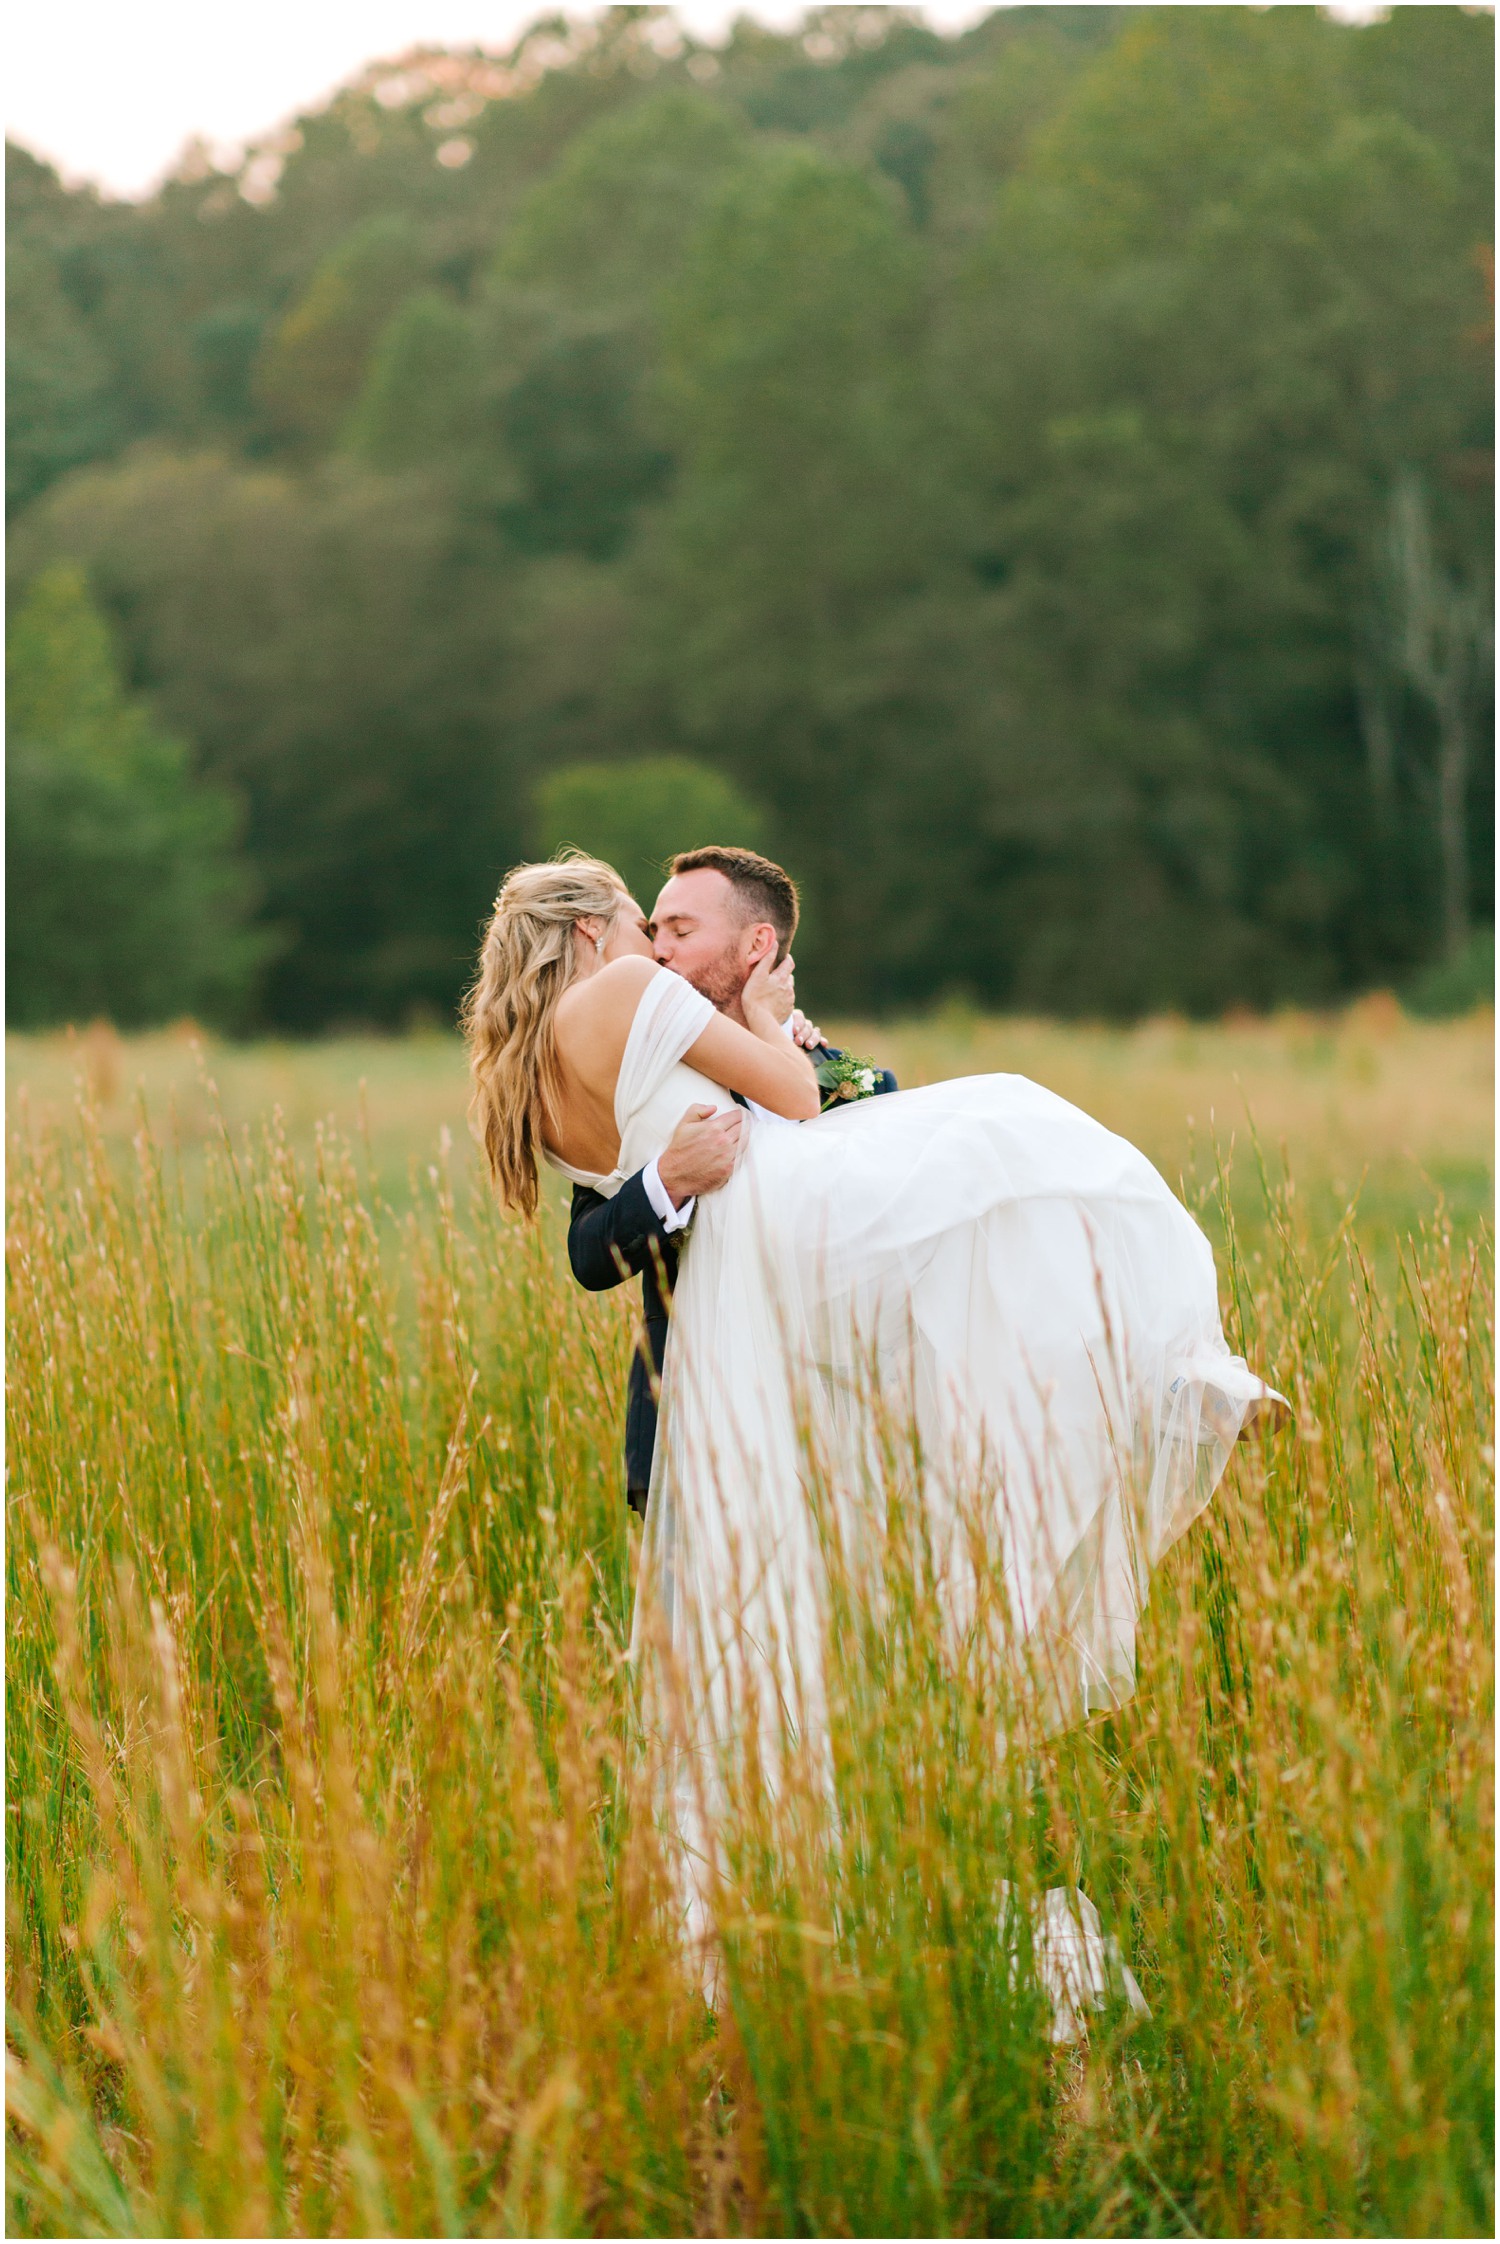 groom lifts bride up while standing in field photographed by Chelsea Renay